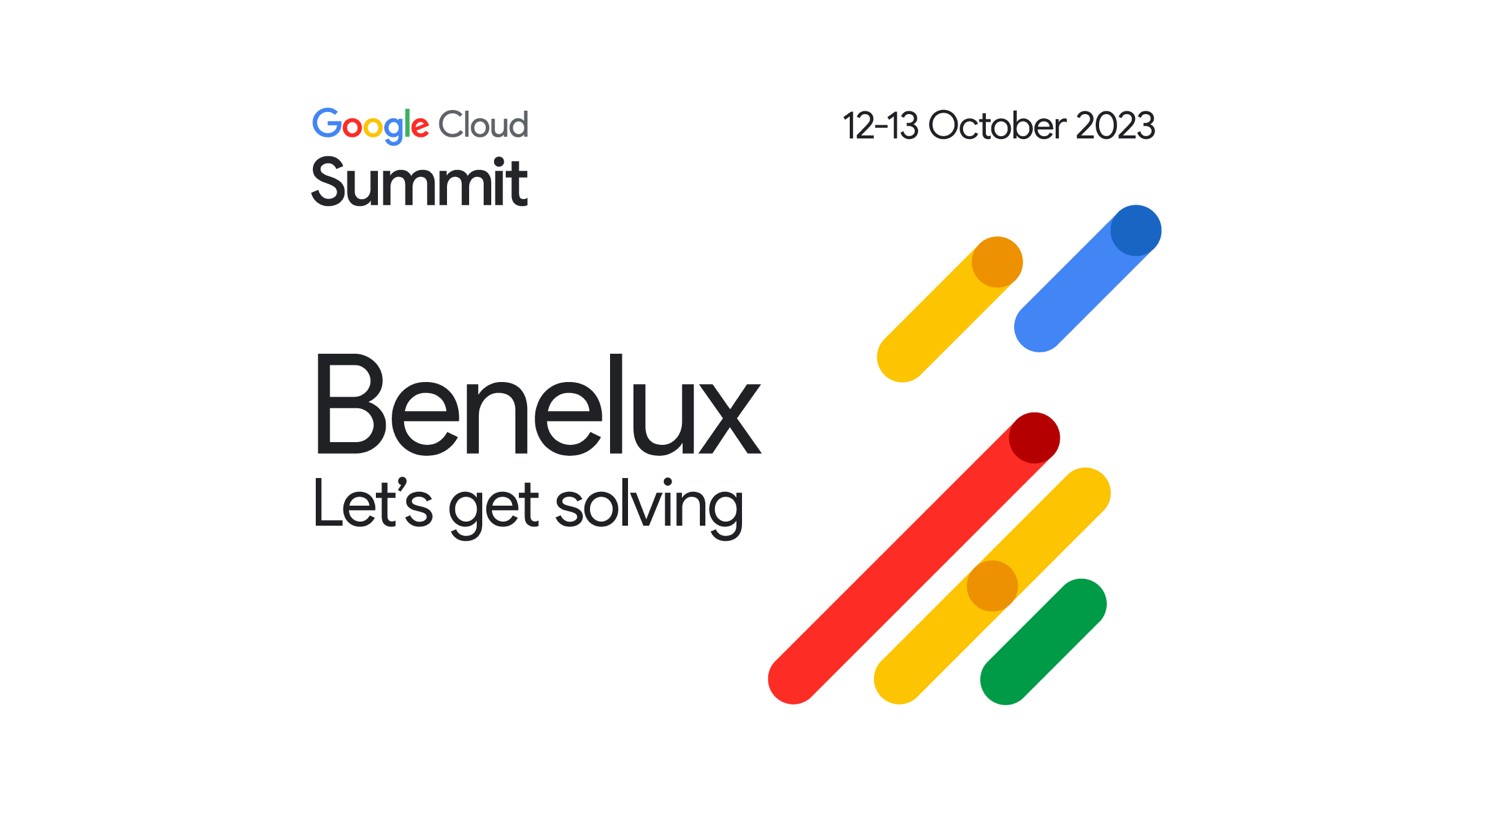 Find Localyse at the Google Cloud Summit Benelux in Amsterdam